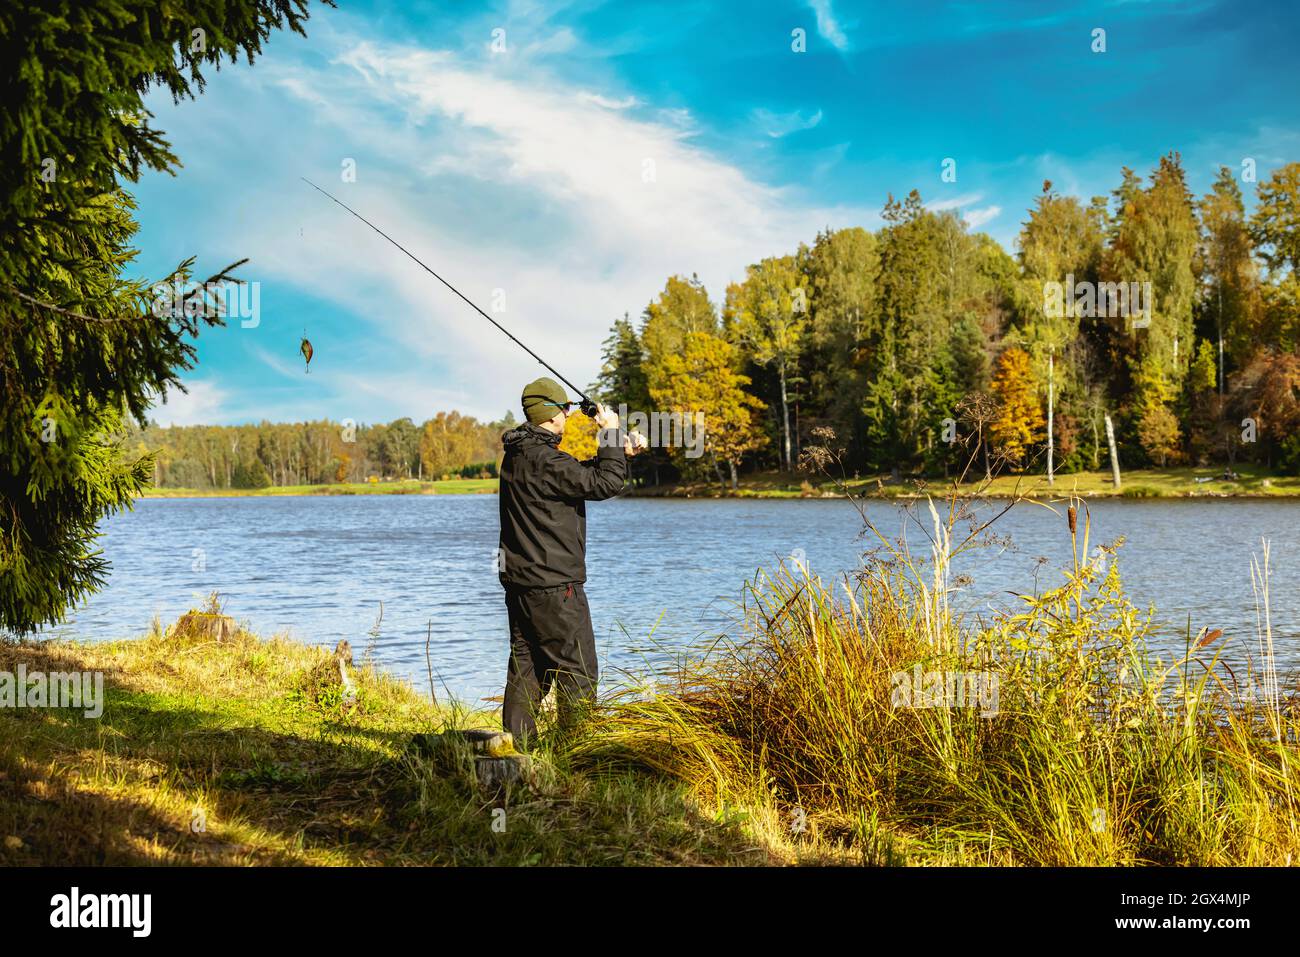 fisherman cast a spinning rod into the lake on sunny day. bank fishing Stock Photo